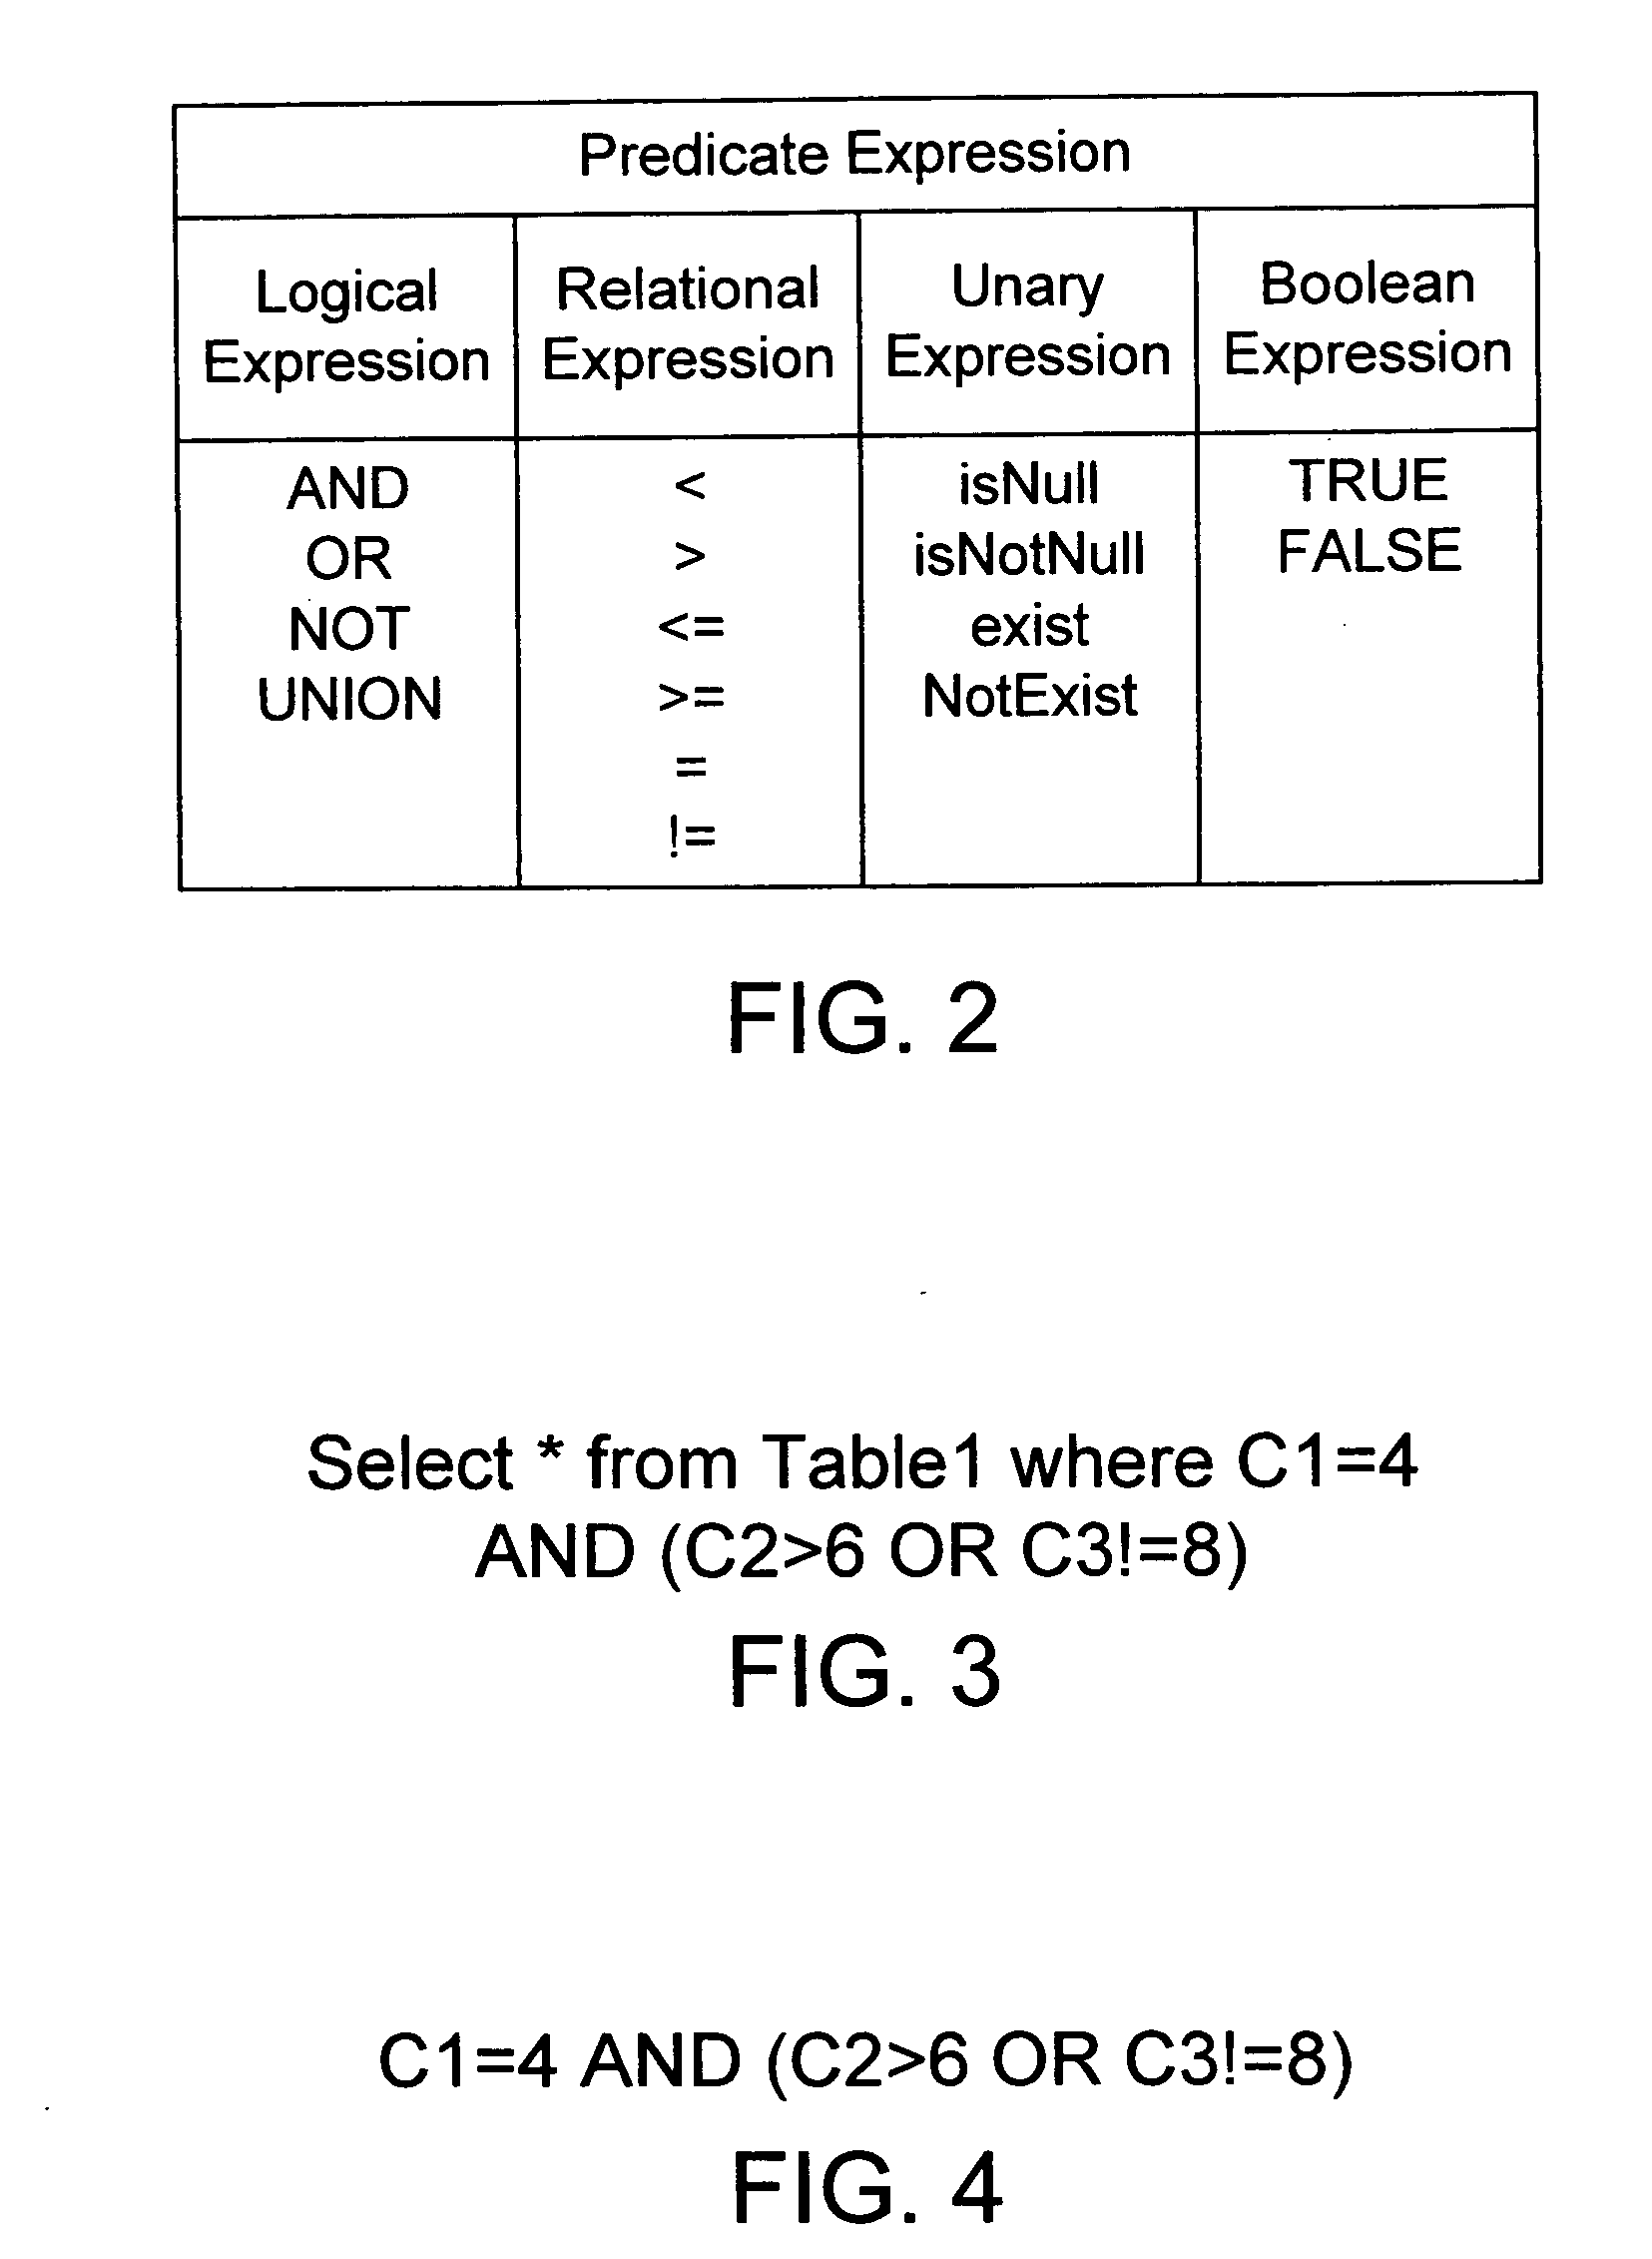 Apparatus and method for optimizing a computer database query that Fetches n rows